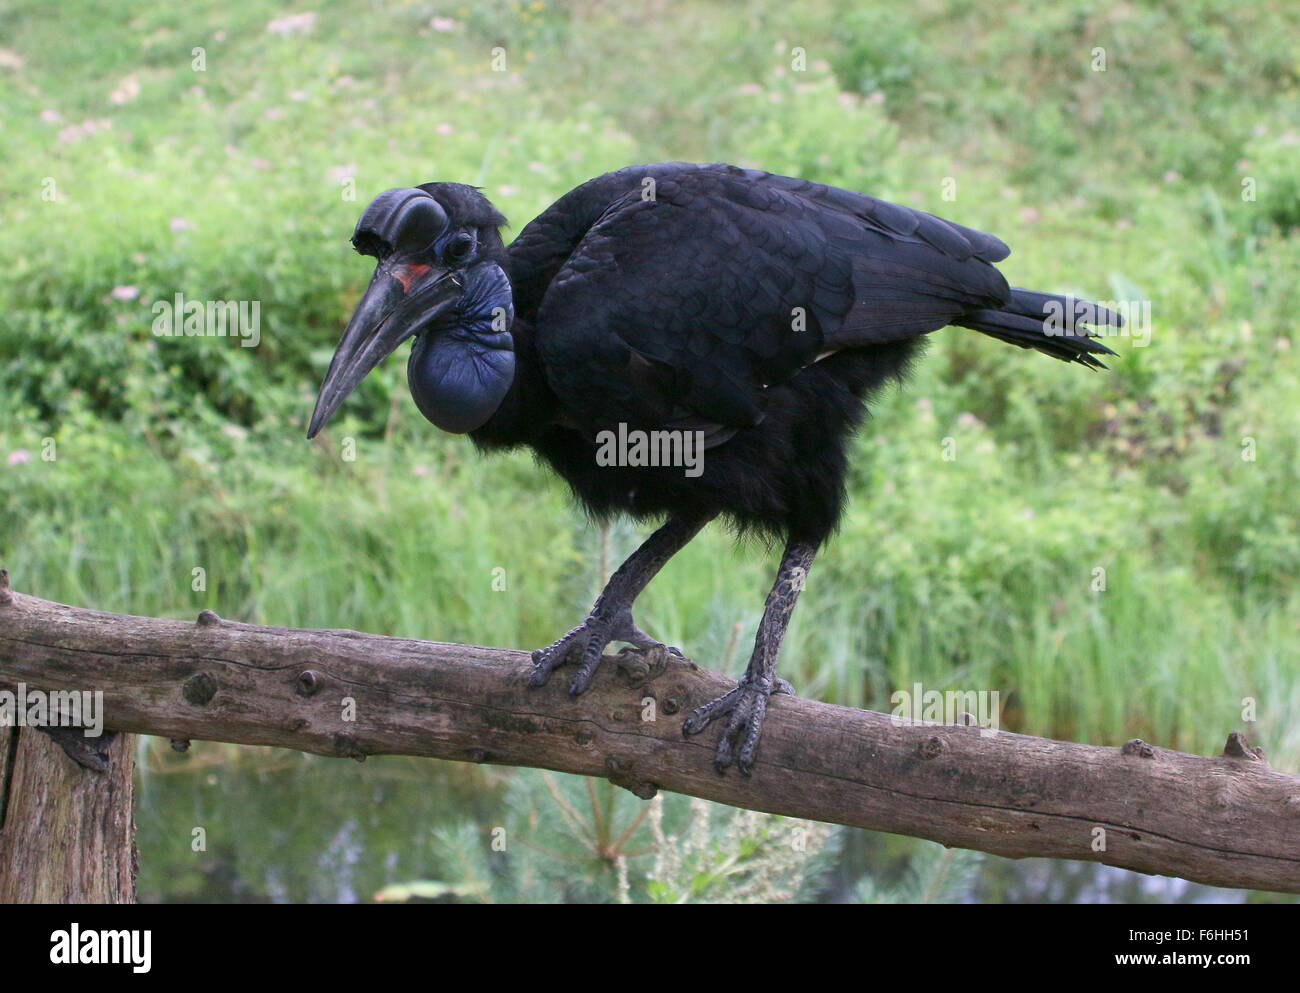 Female Abyssinian or Northern Ground hornbill (Bucorvus abyssinicus) perching on a bar Stock Photo